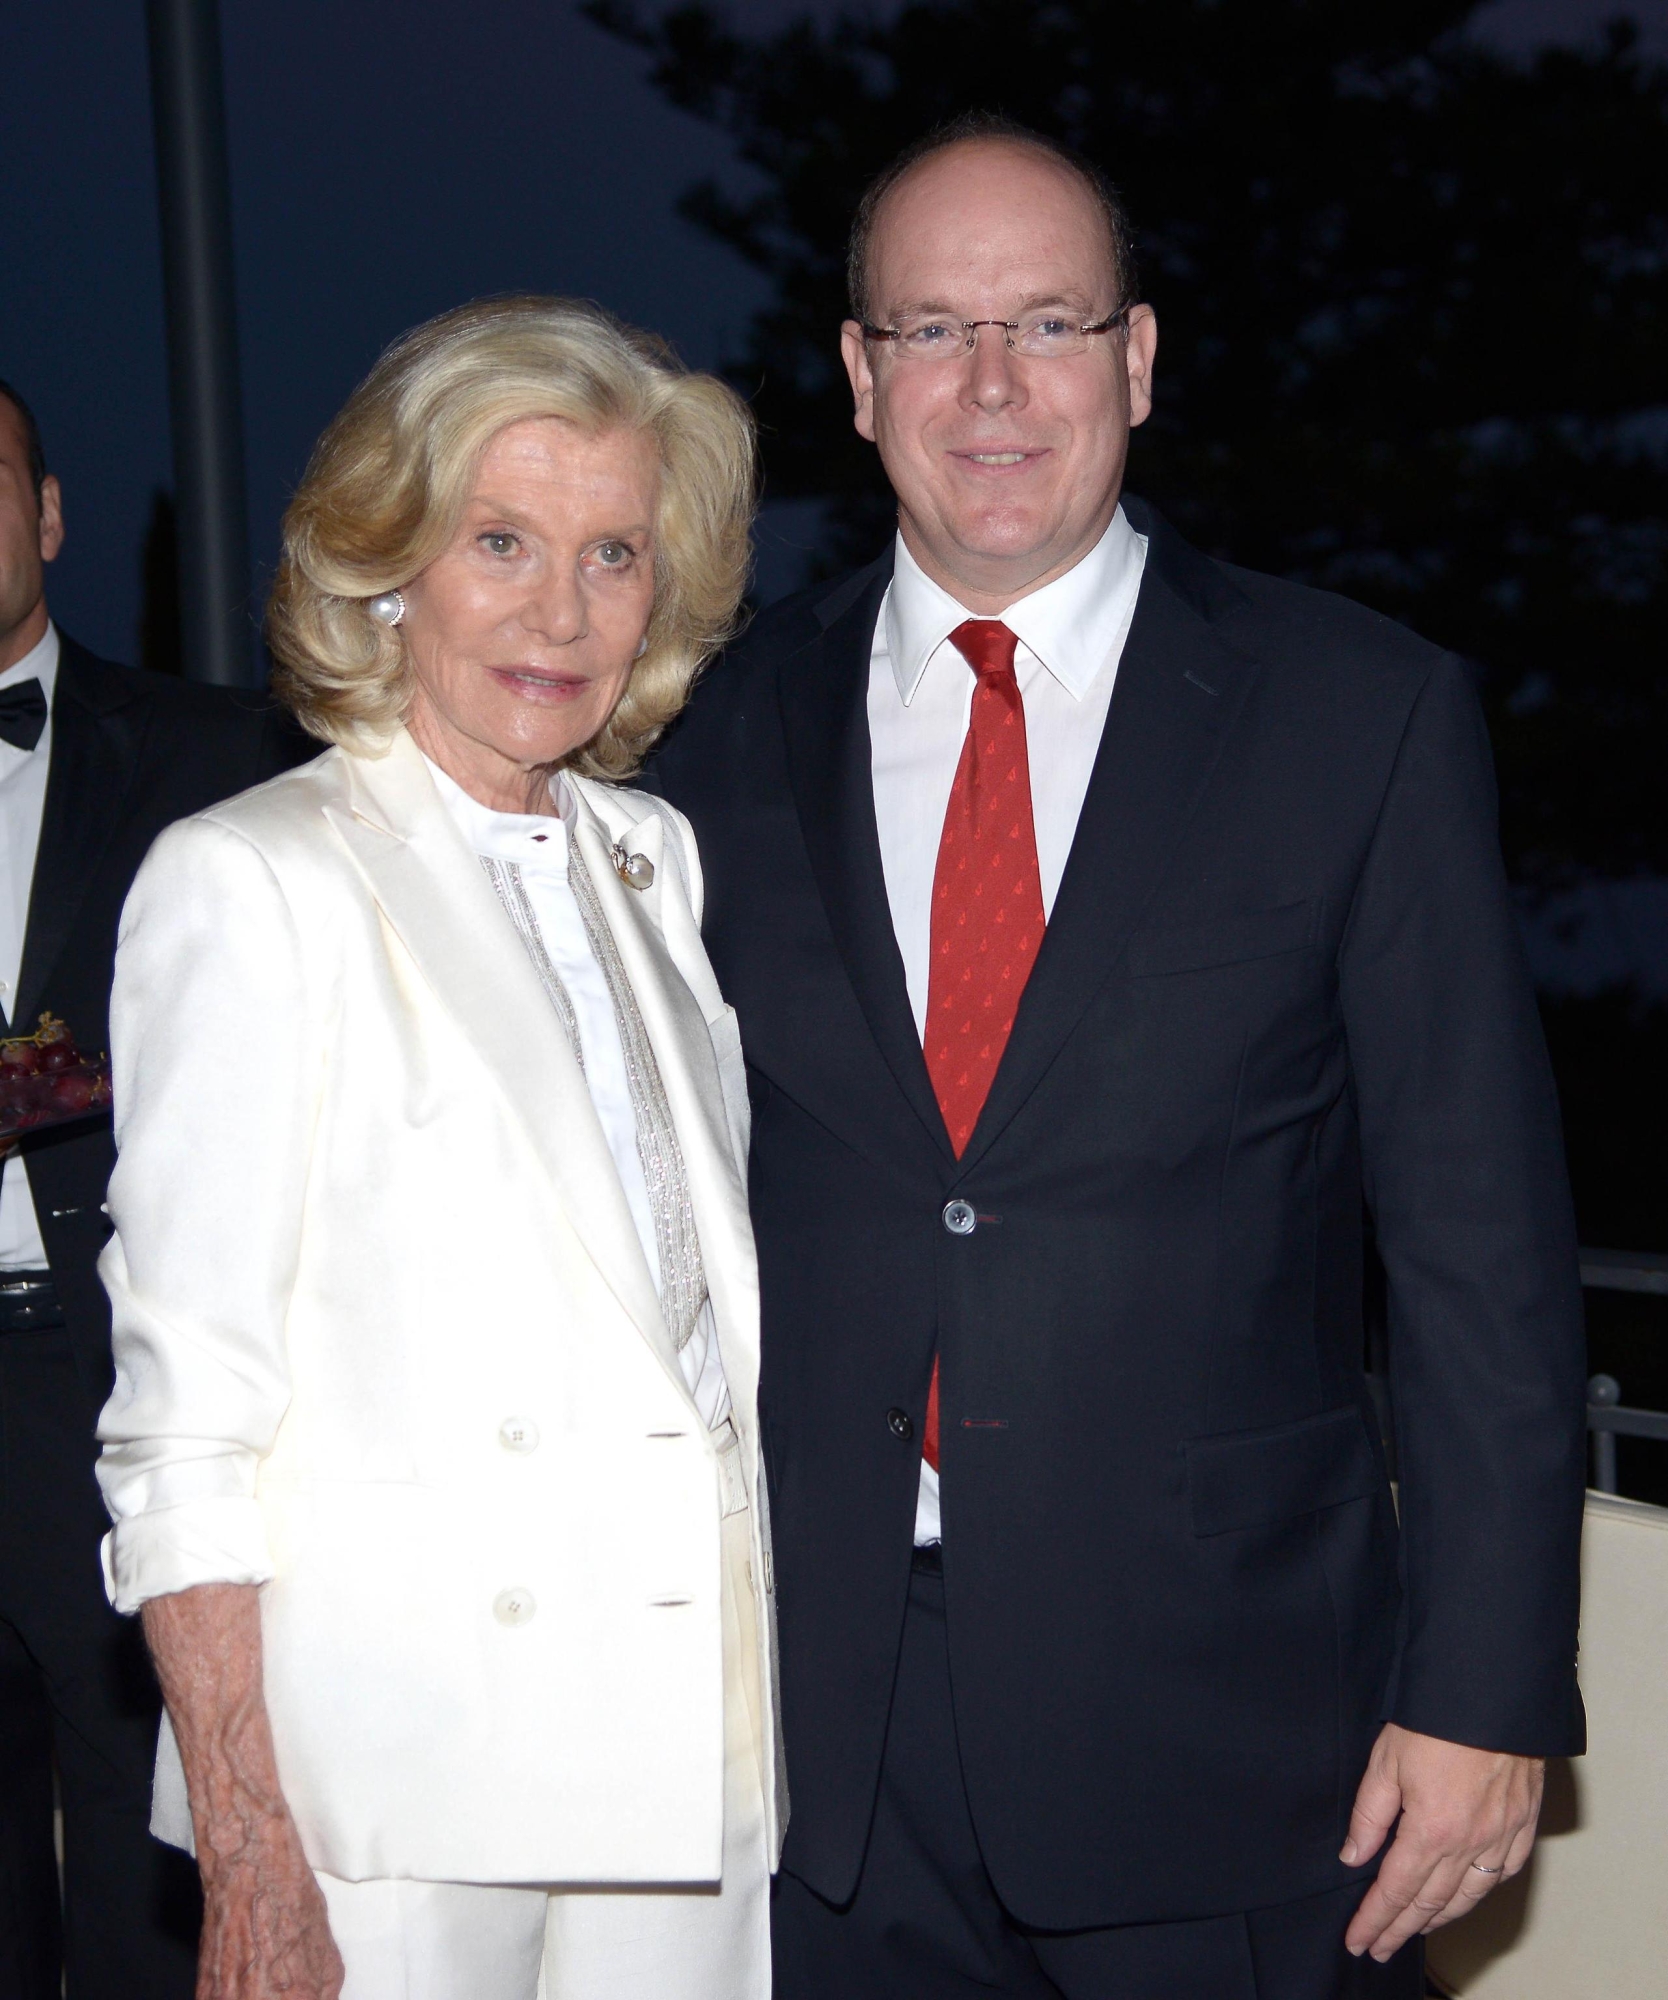 Prince Alberto II of Monaco poses with Marina Cicogna (R) during a party before the special evening dedicated to the "Fondation Prince Albert II of Monaco", worked for many years on the protection of the environment and promotion of sustainable development on a global scale, during the Taormina Film Festival, at the Teatro Antico, in Taormina, Sicily Island, Italy, late 16 June 2013.  ANSA/CLAUDIO ONORATI